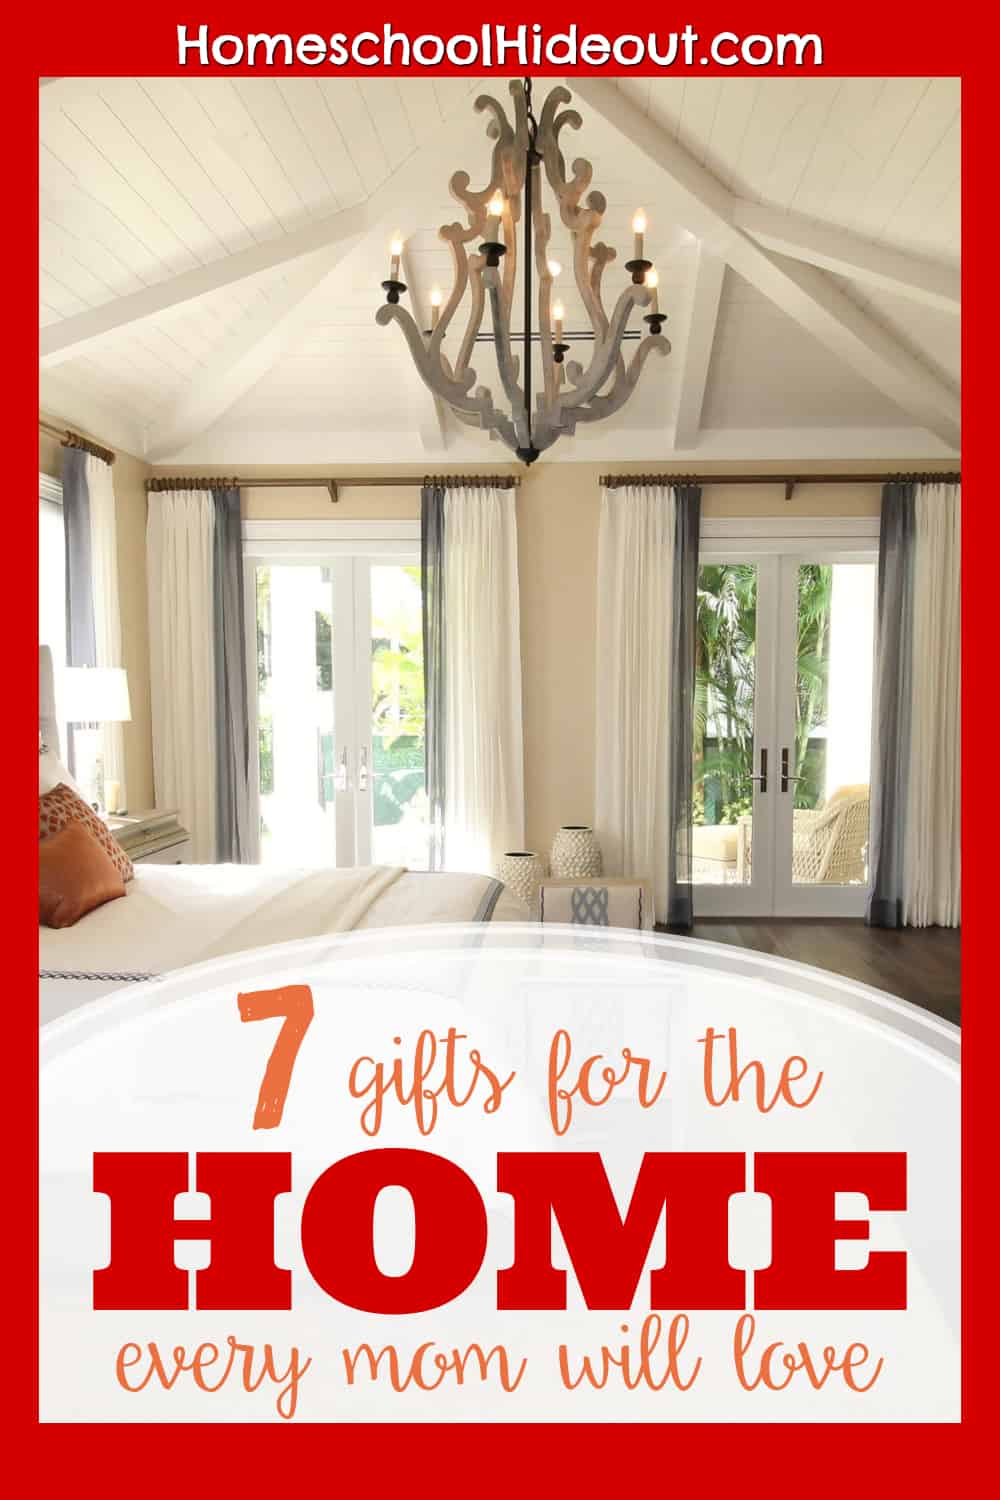 Ohhh! Totally loving this list of 7 gifts for the home that mom will love. Now, which ones shall I buy!?!